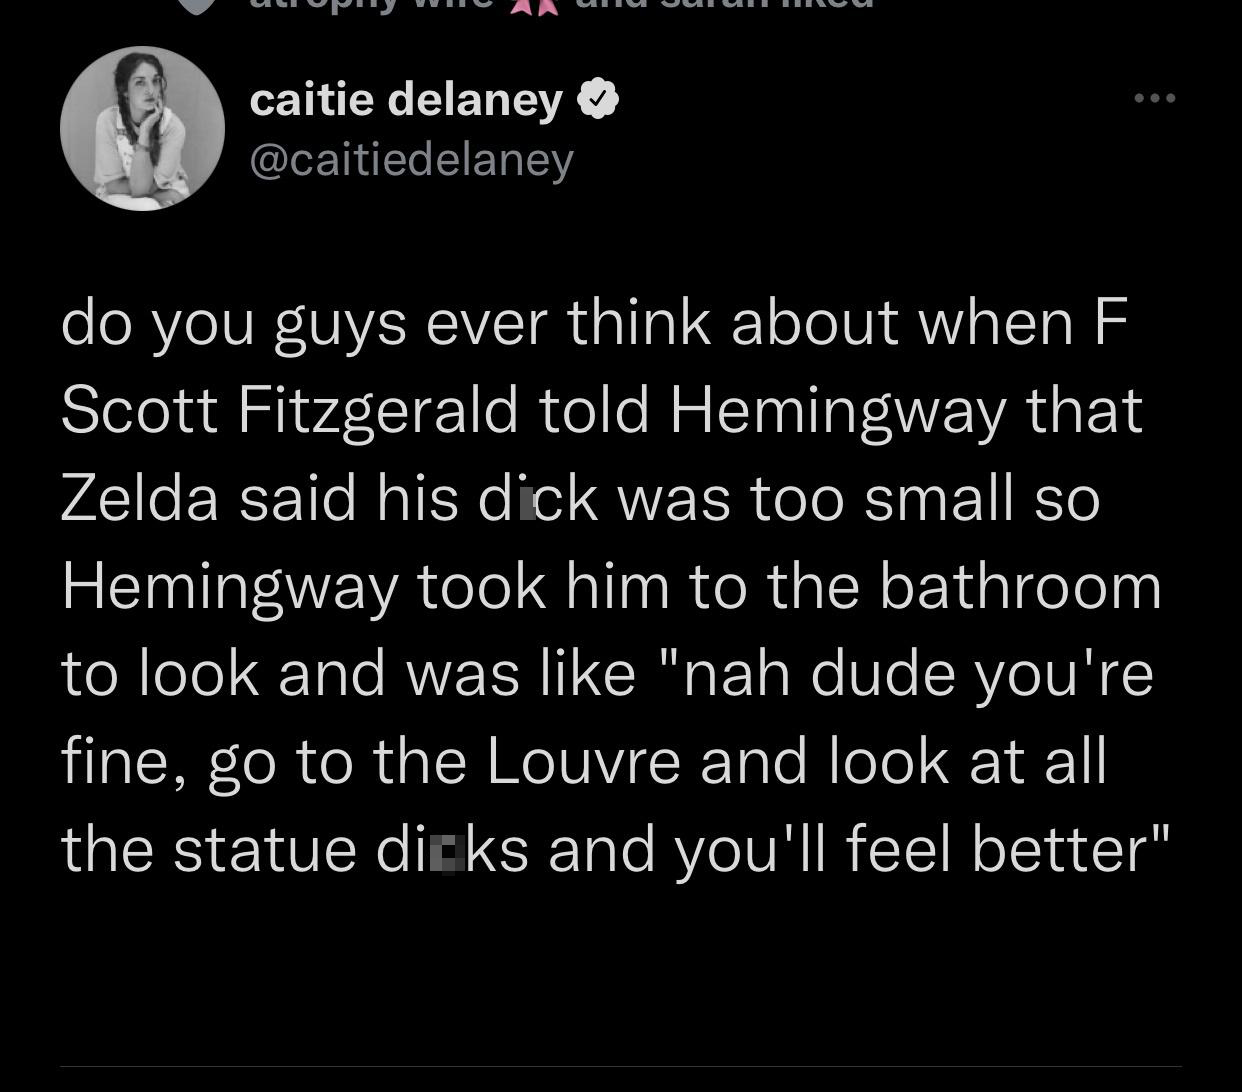 funny tweets and twitter memes - atmosphere - caitie delaney do you guys ever think about when F Scott Fitzgerald told Hemingway that Zelda said his dick was too small so Hemingway took him to the bathroom to look and was "nah dude you're fine, go to the 